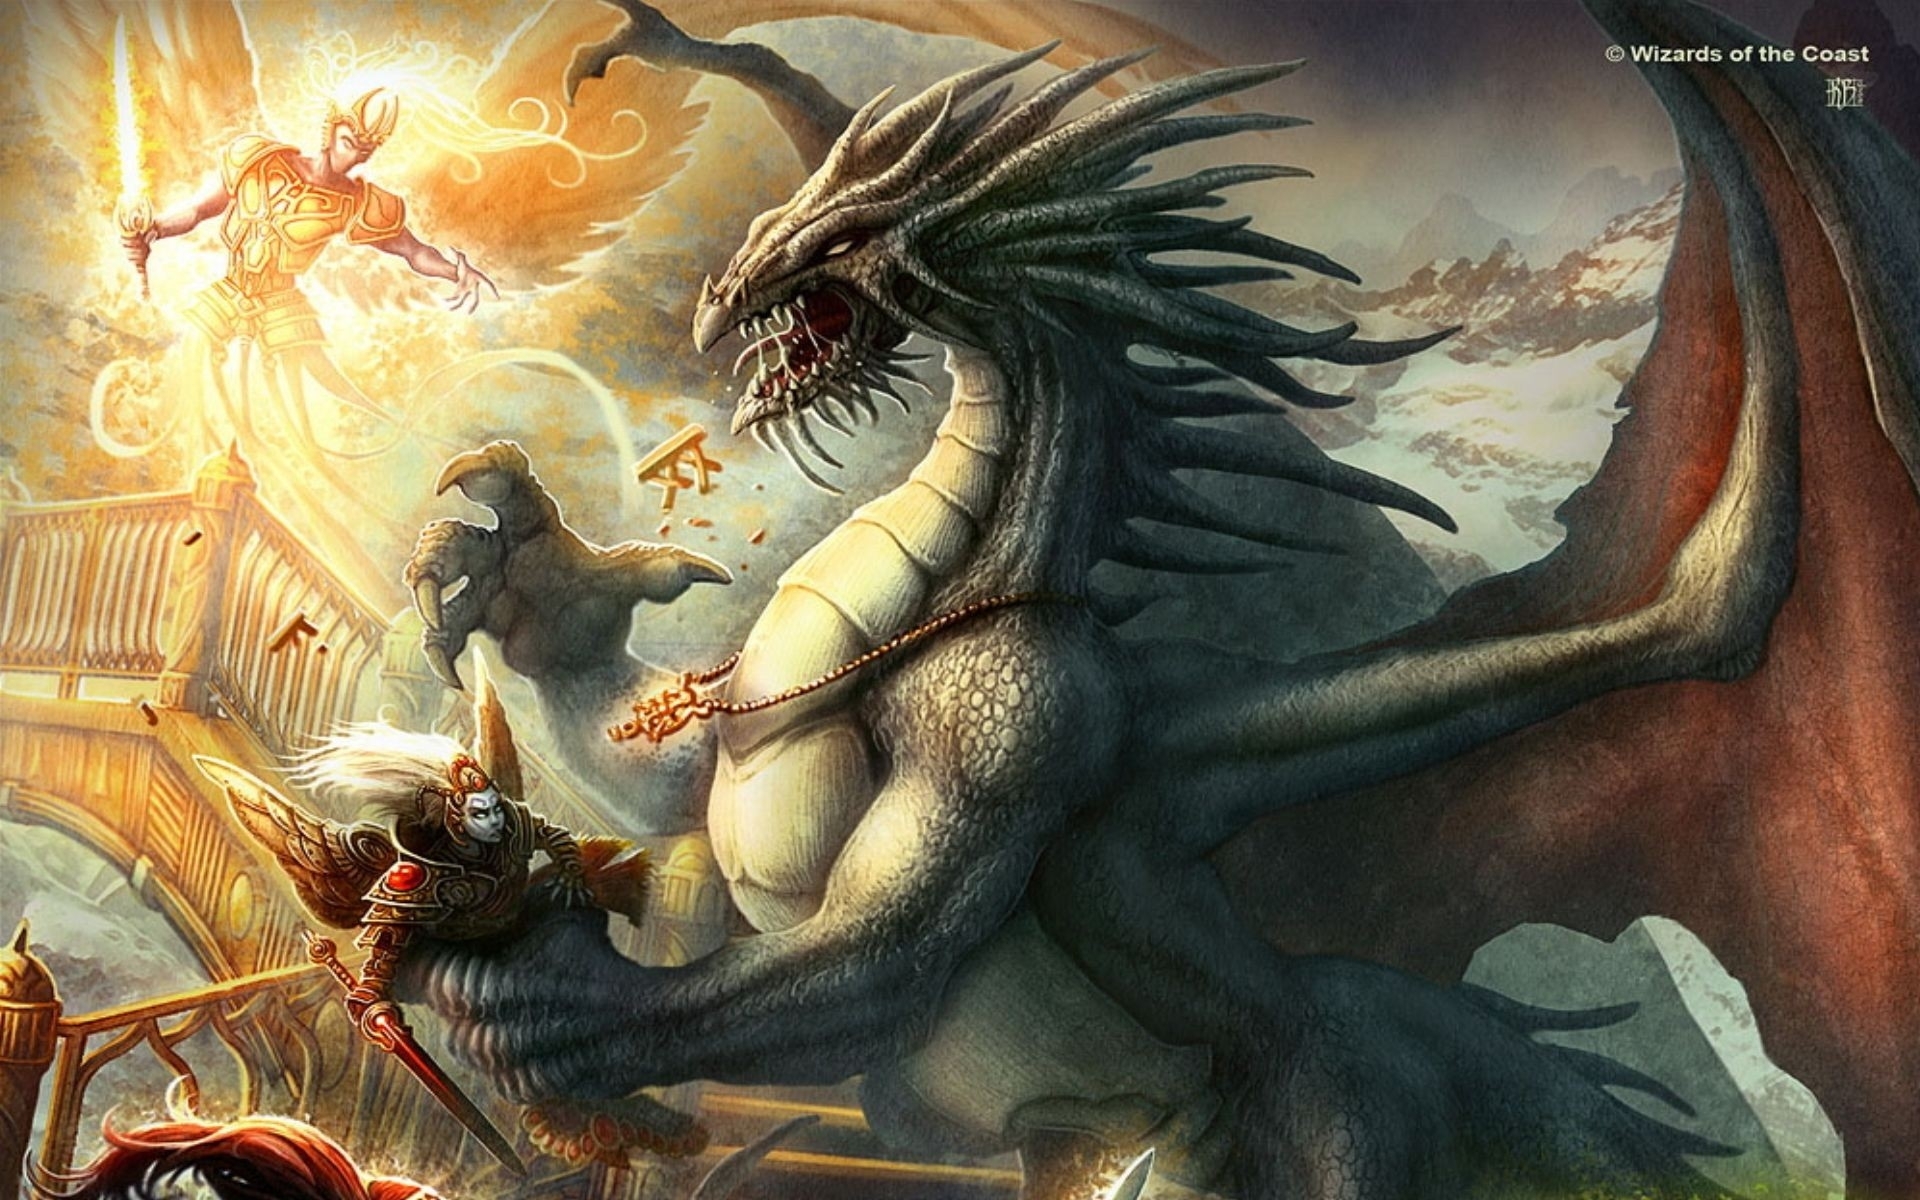 Fantasy Dungeons & Dragons Wallpapers